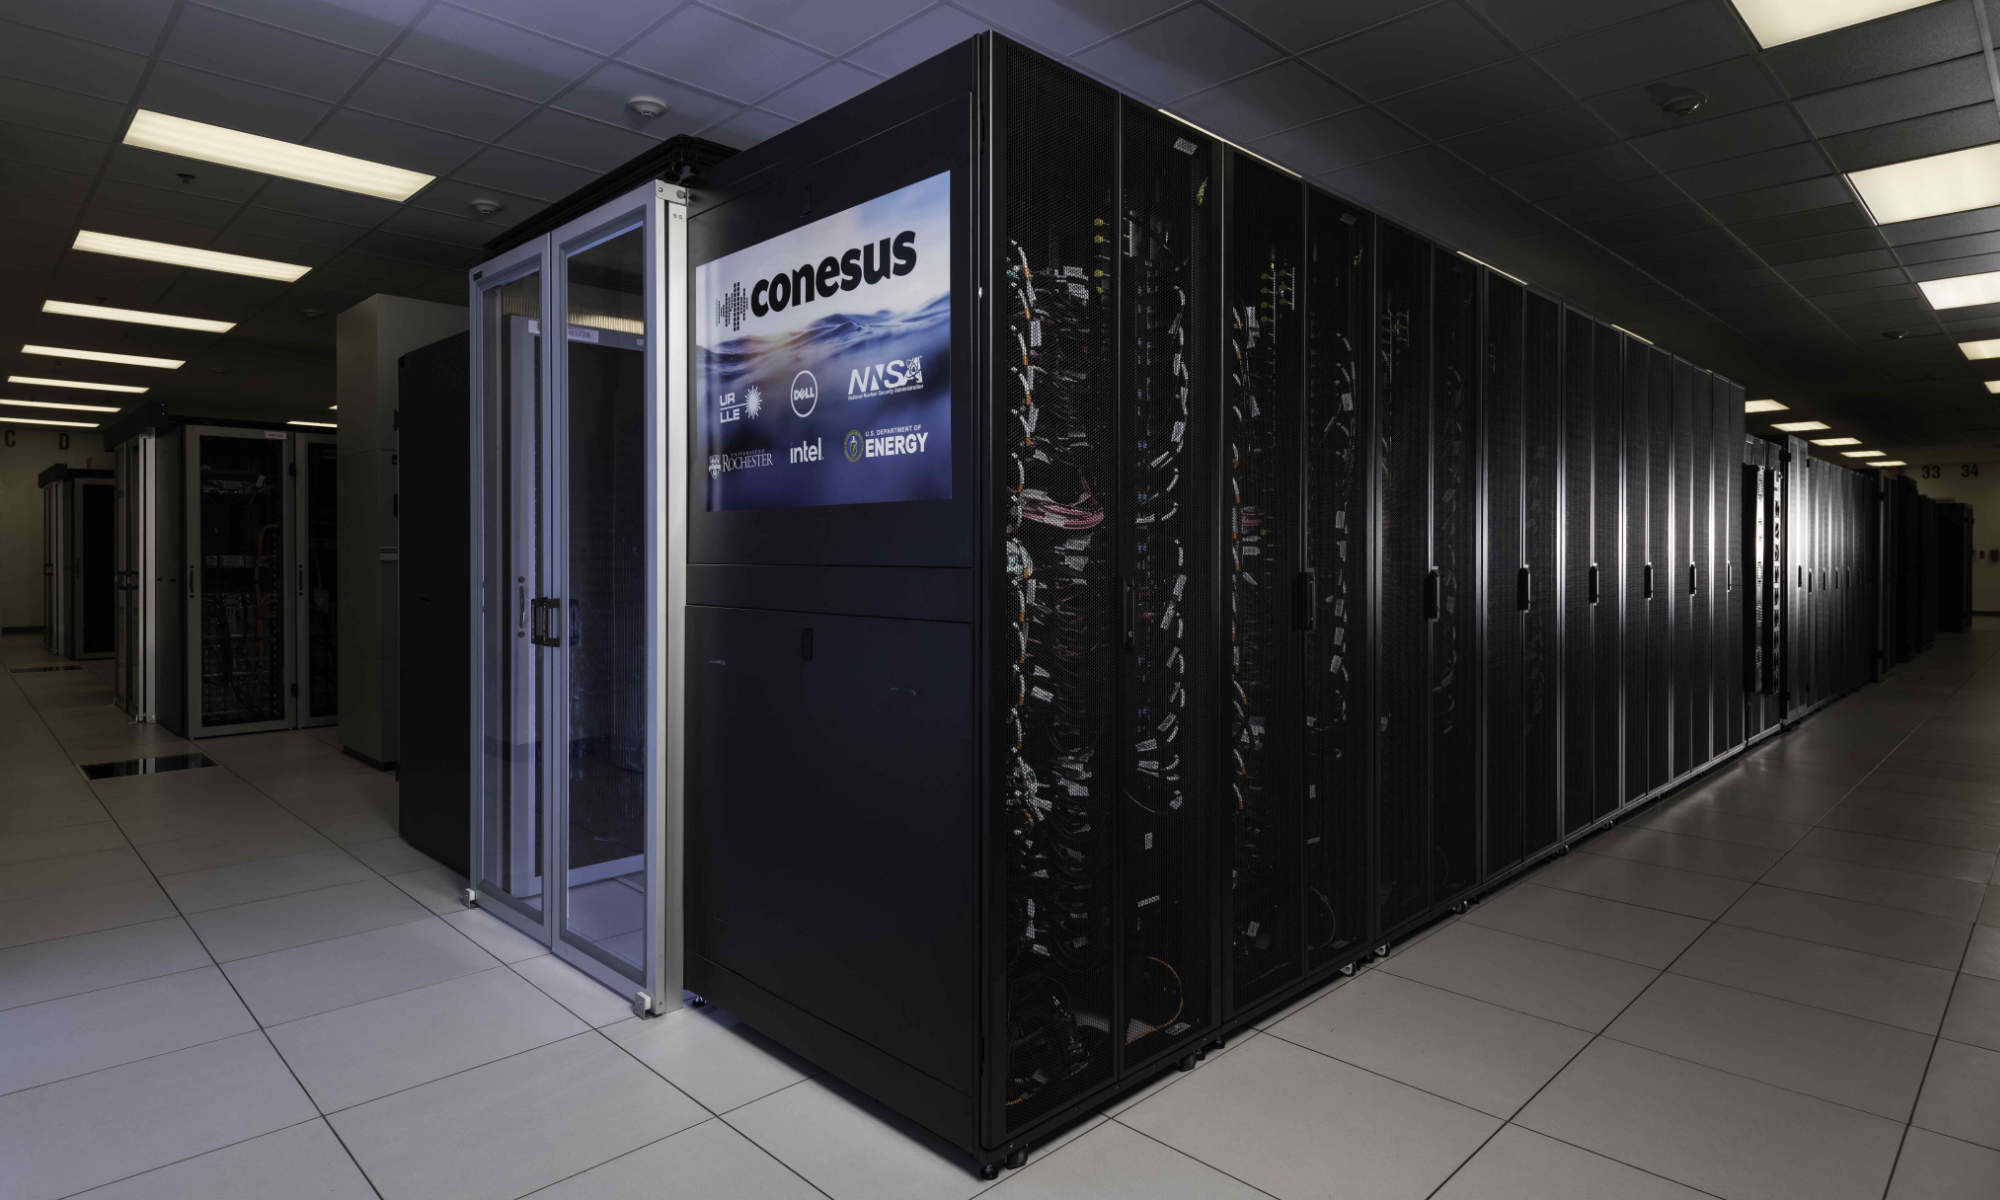 Wide view of the Conesus supercomputer at the University of Rochester.